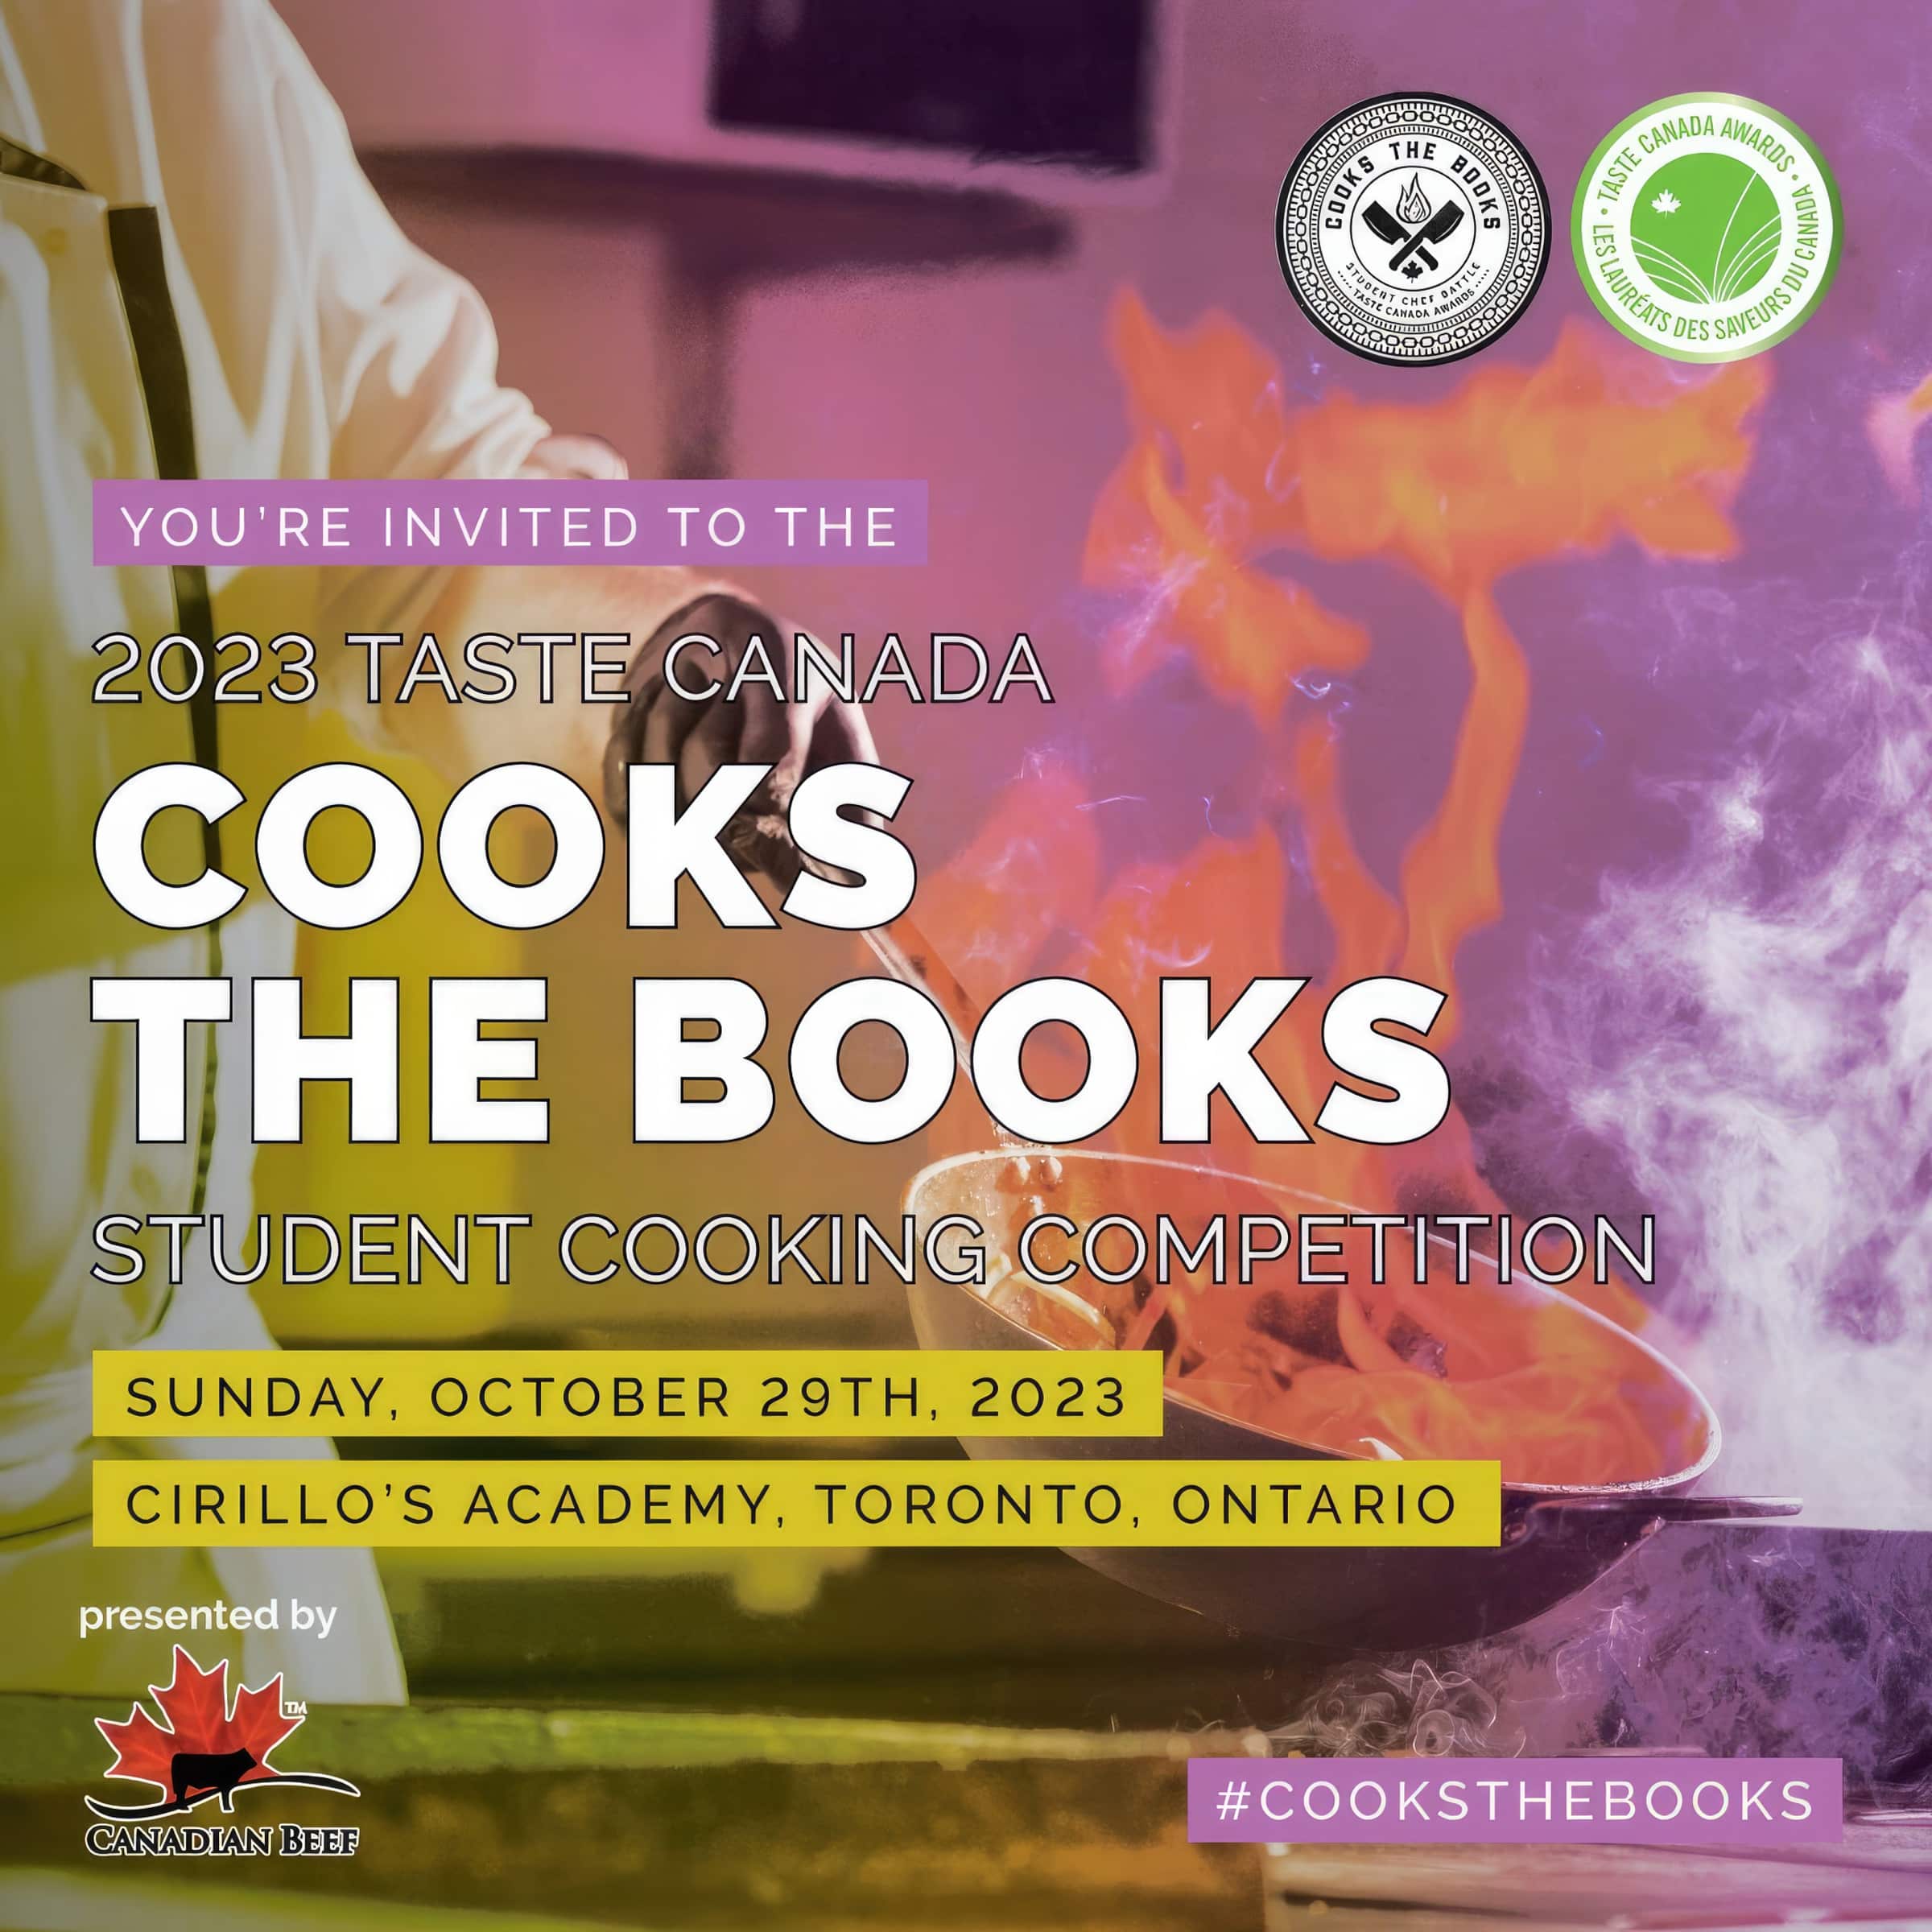 2023 Taste Canada Cooks the Books Student Cooking Competition Invite - Image - Top Toques Institute of Culinary Excellence